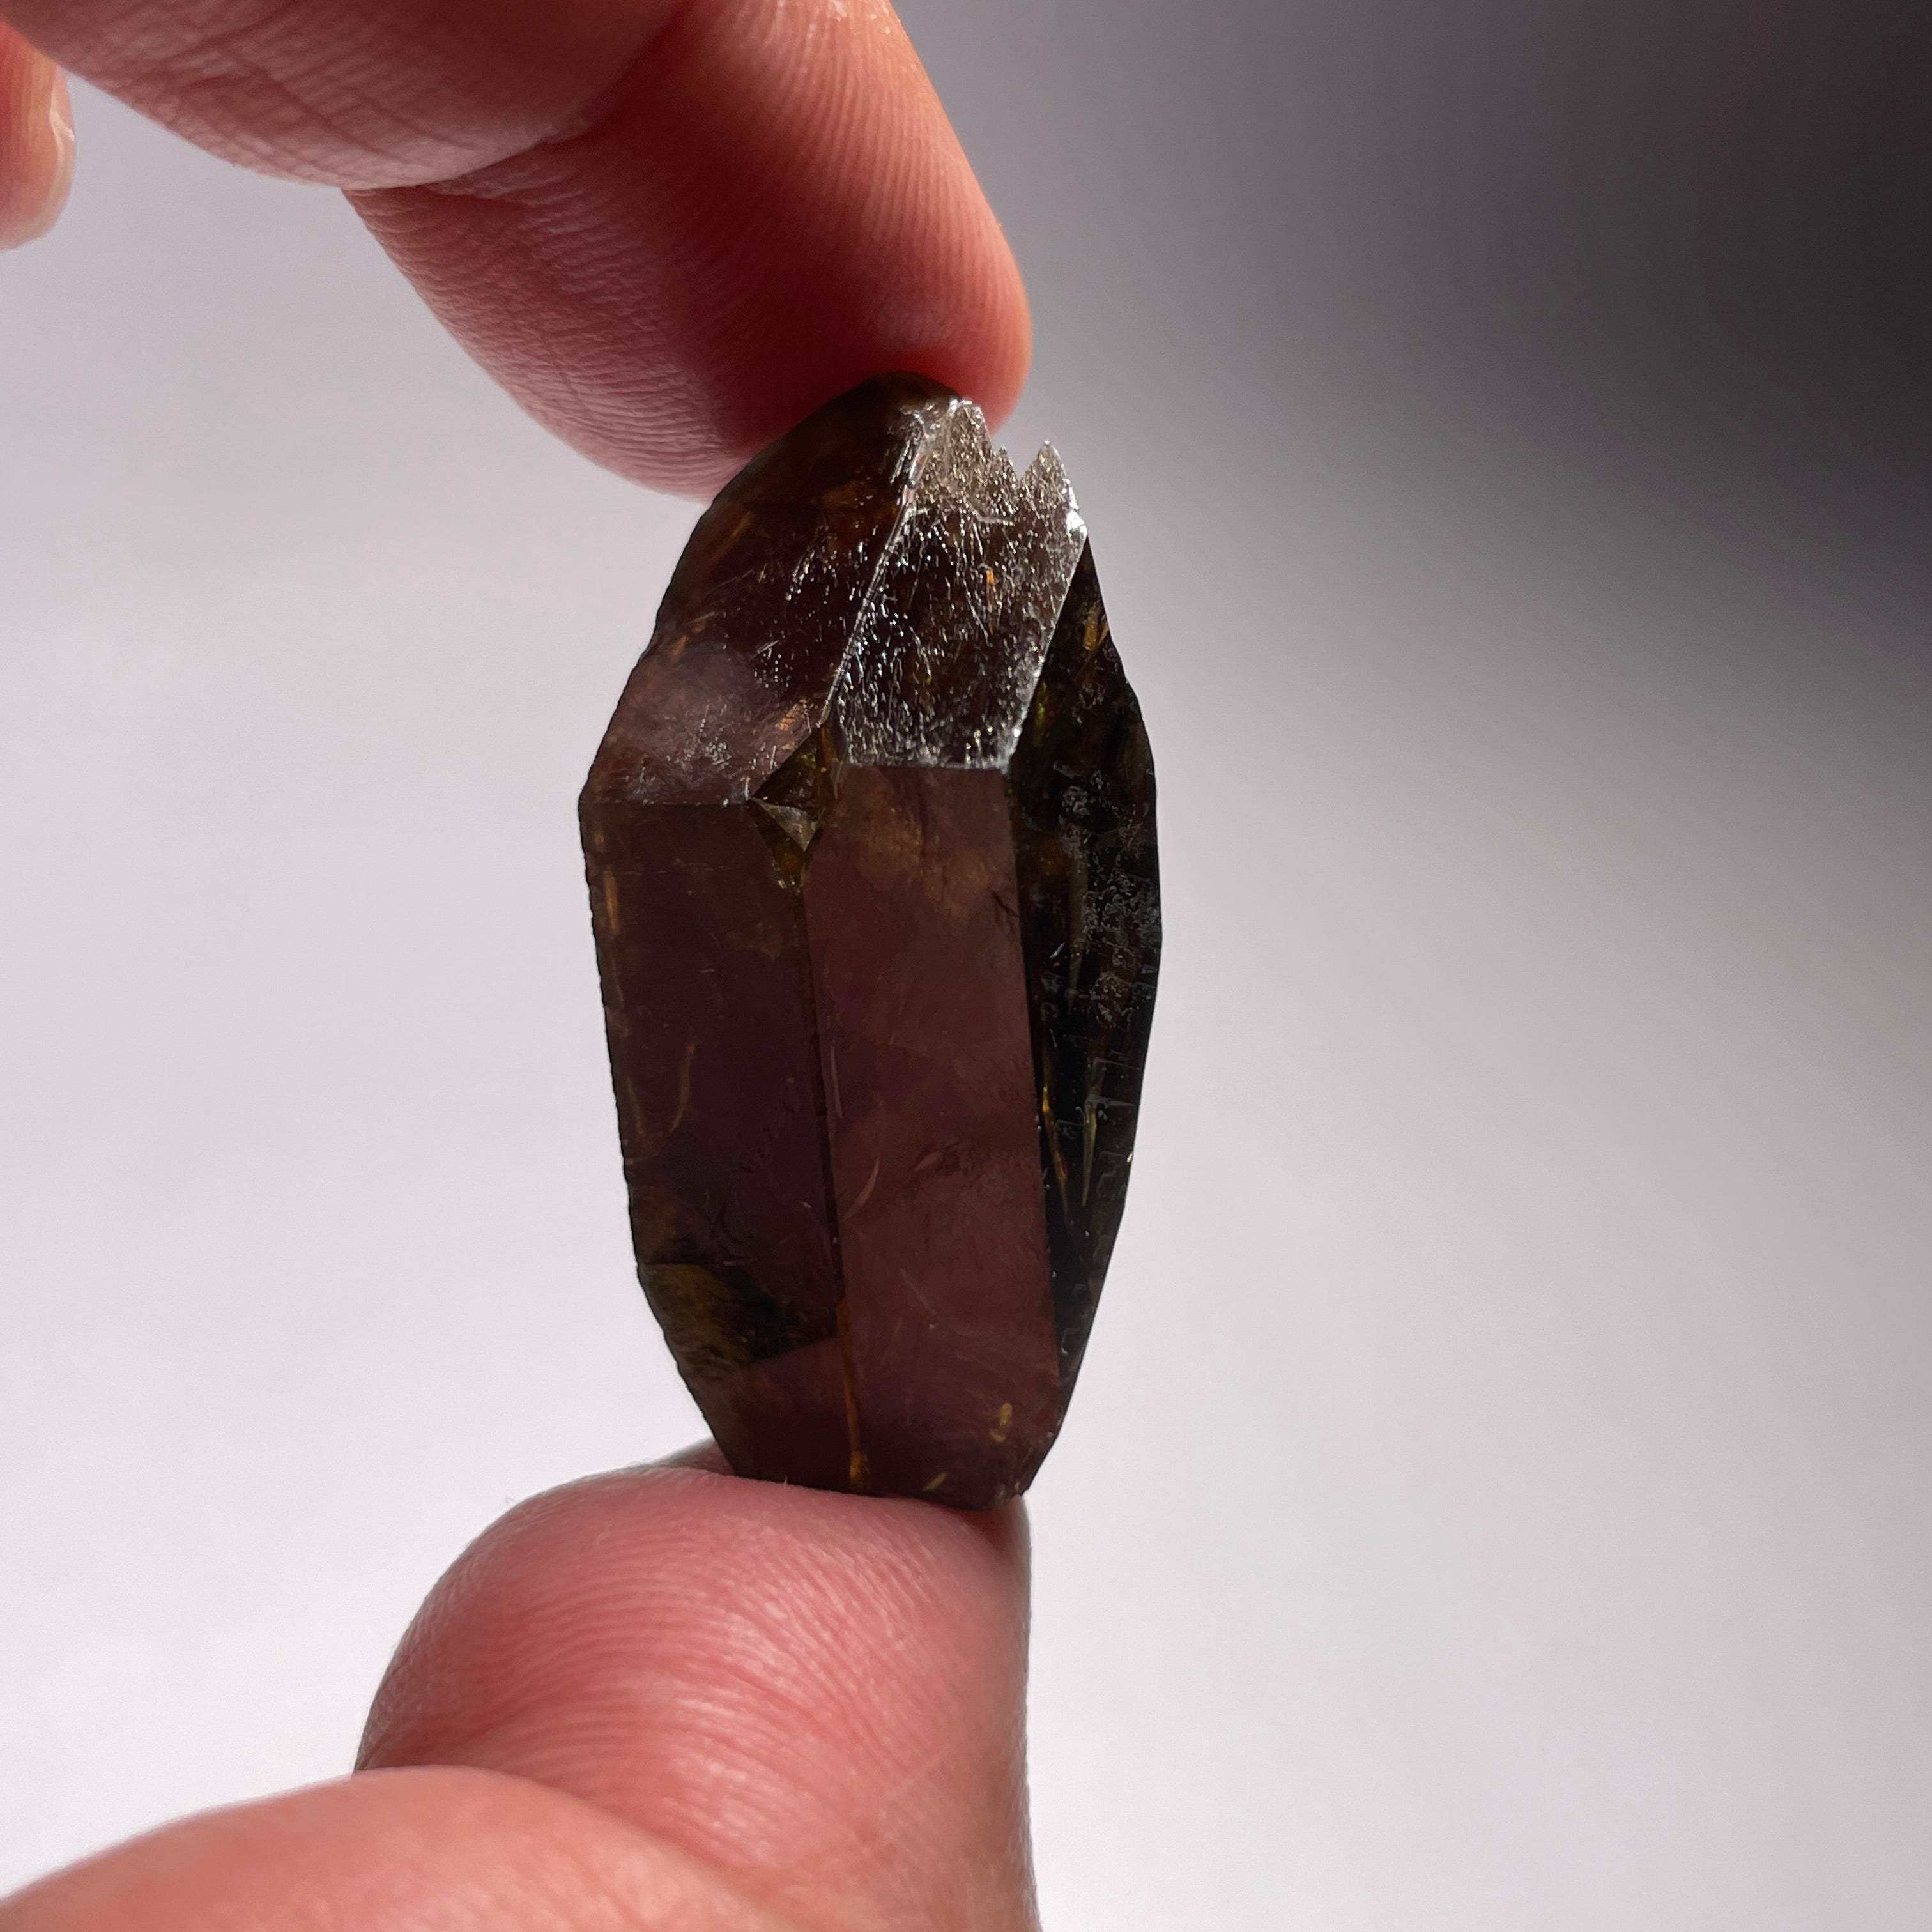 80.67Ct/16.13Gm Tanzanian Sphene Crystal Untreated Unheated. 38.4 X 15.5 19.6Mm Very High End Ultra